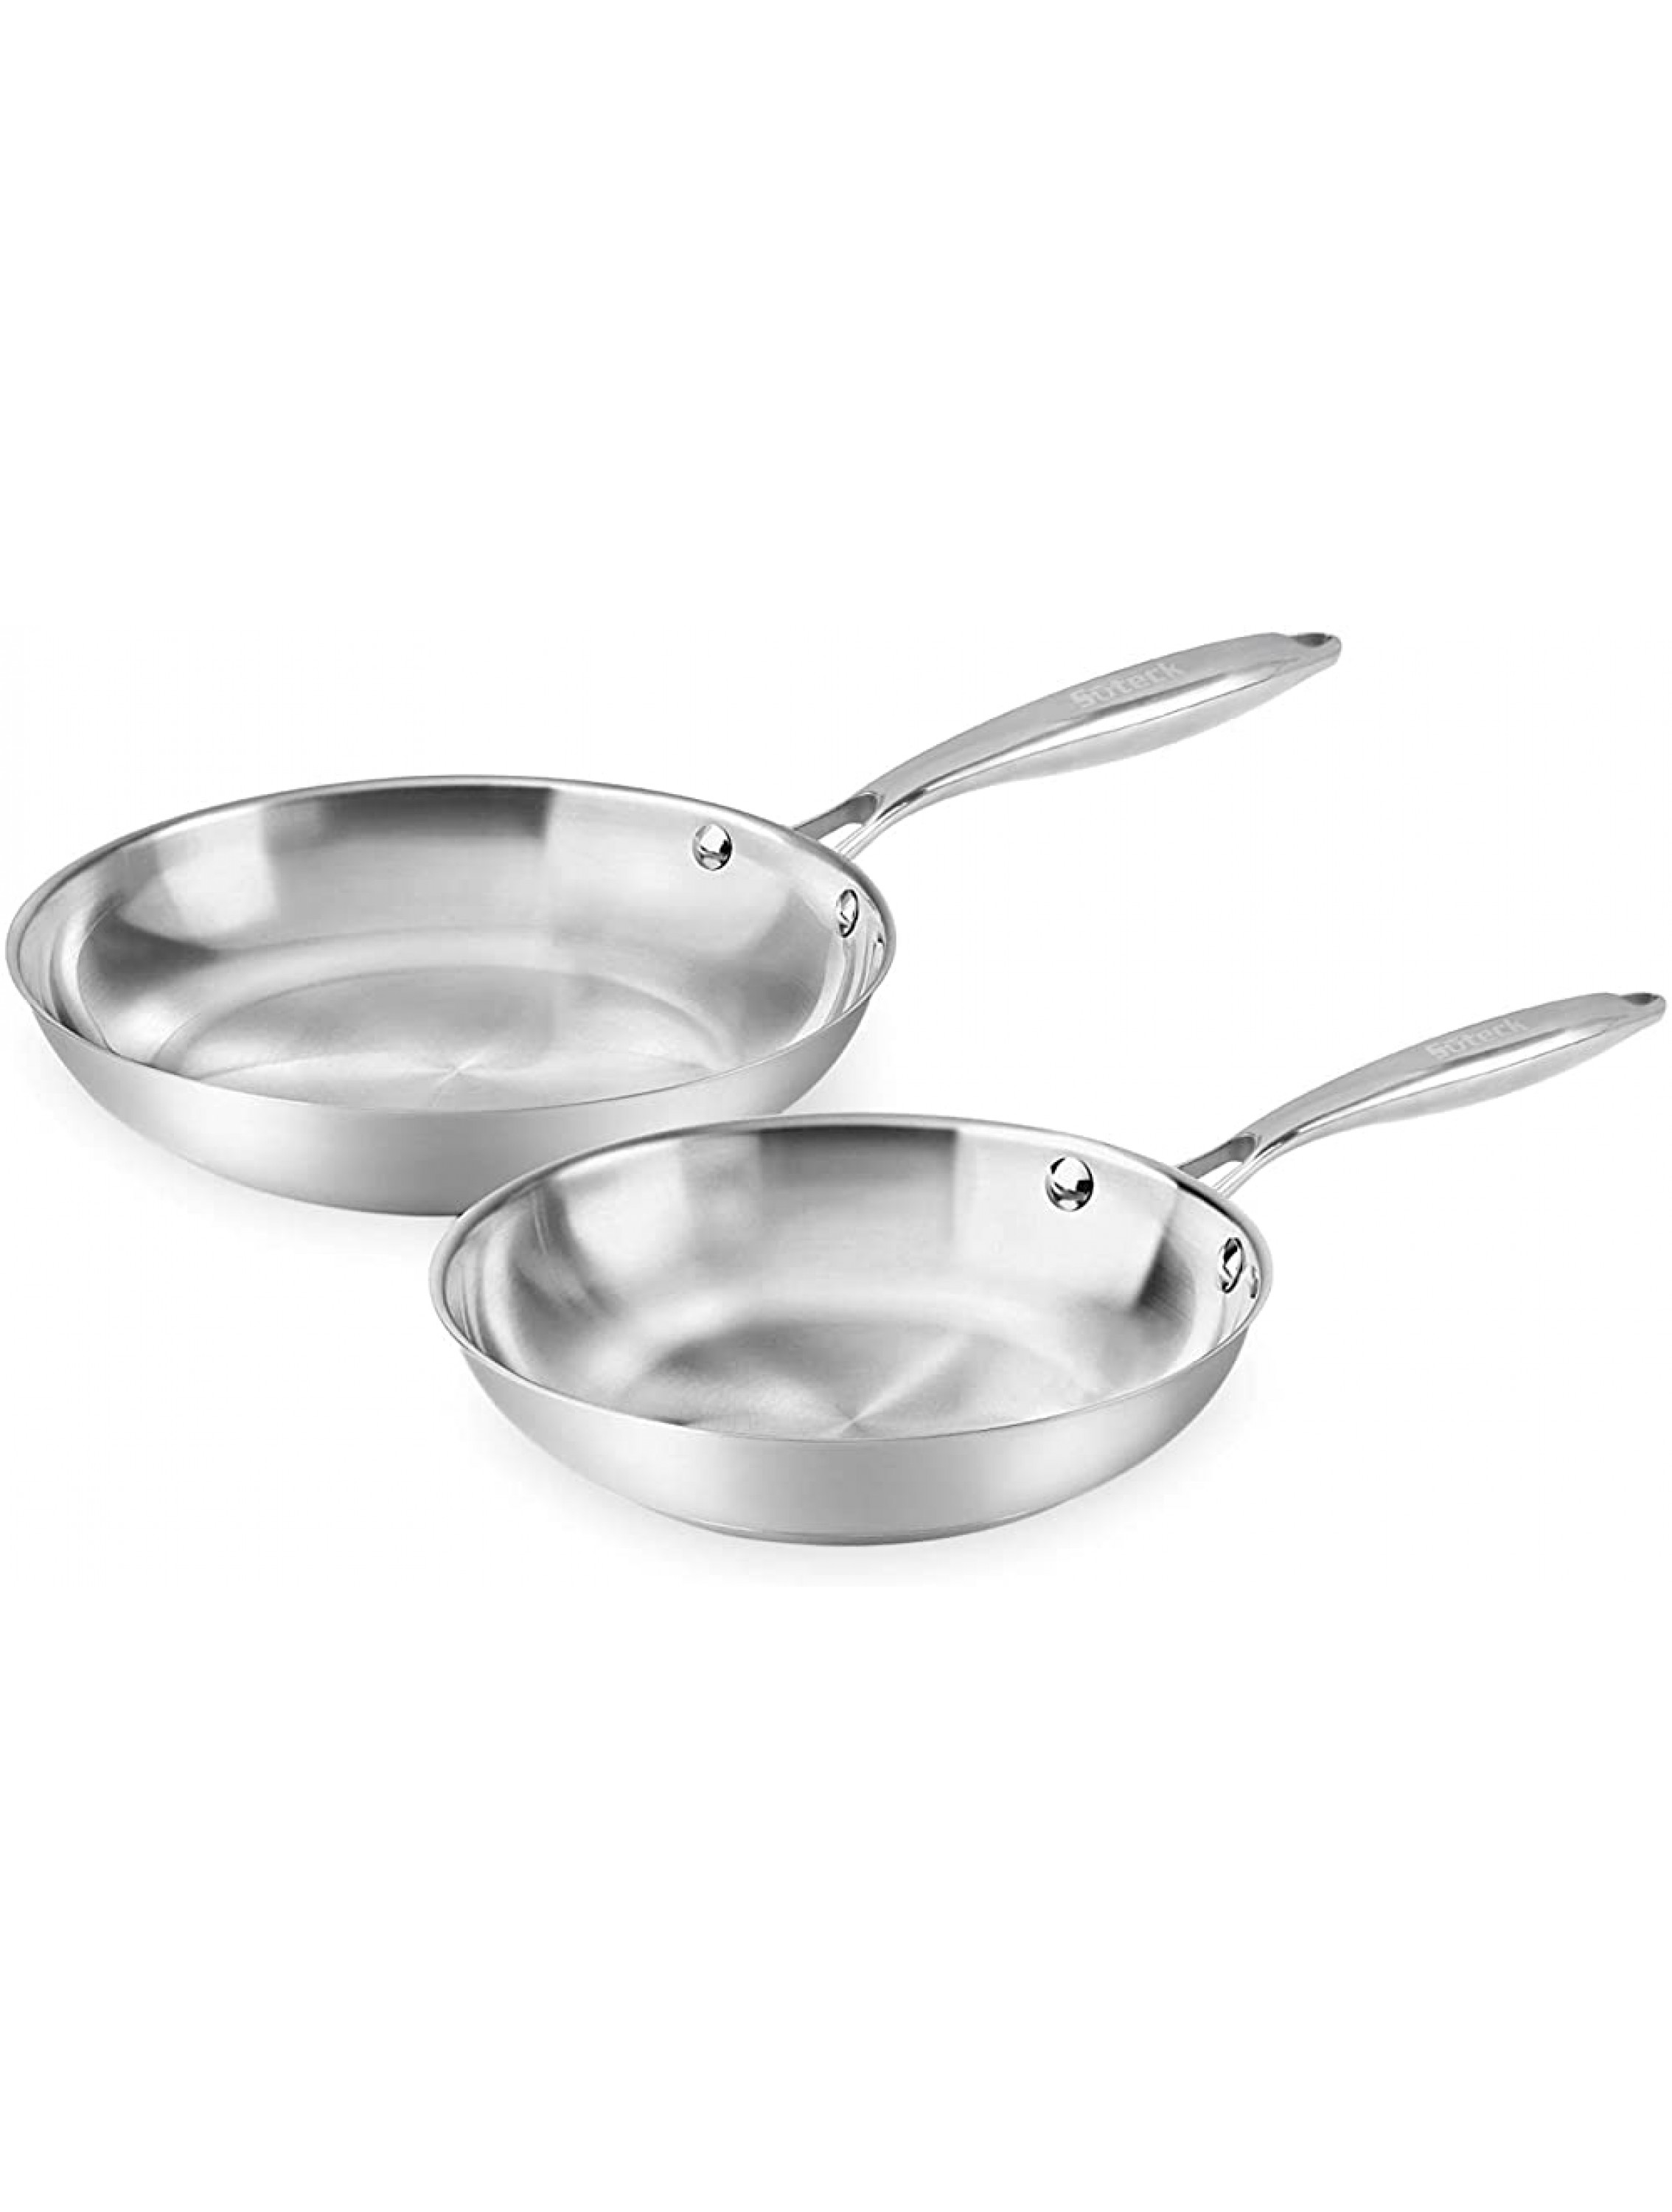 Fry Pan Set of 2 | 8 & 10 Tri-Ply Stainless Steel Frying Pan Oven & Dishwasher Safe Classic Cooking Pan Cookware - BKNDFLXU7